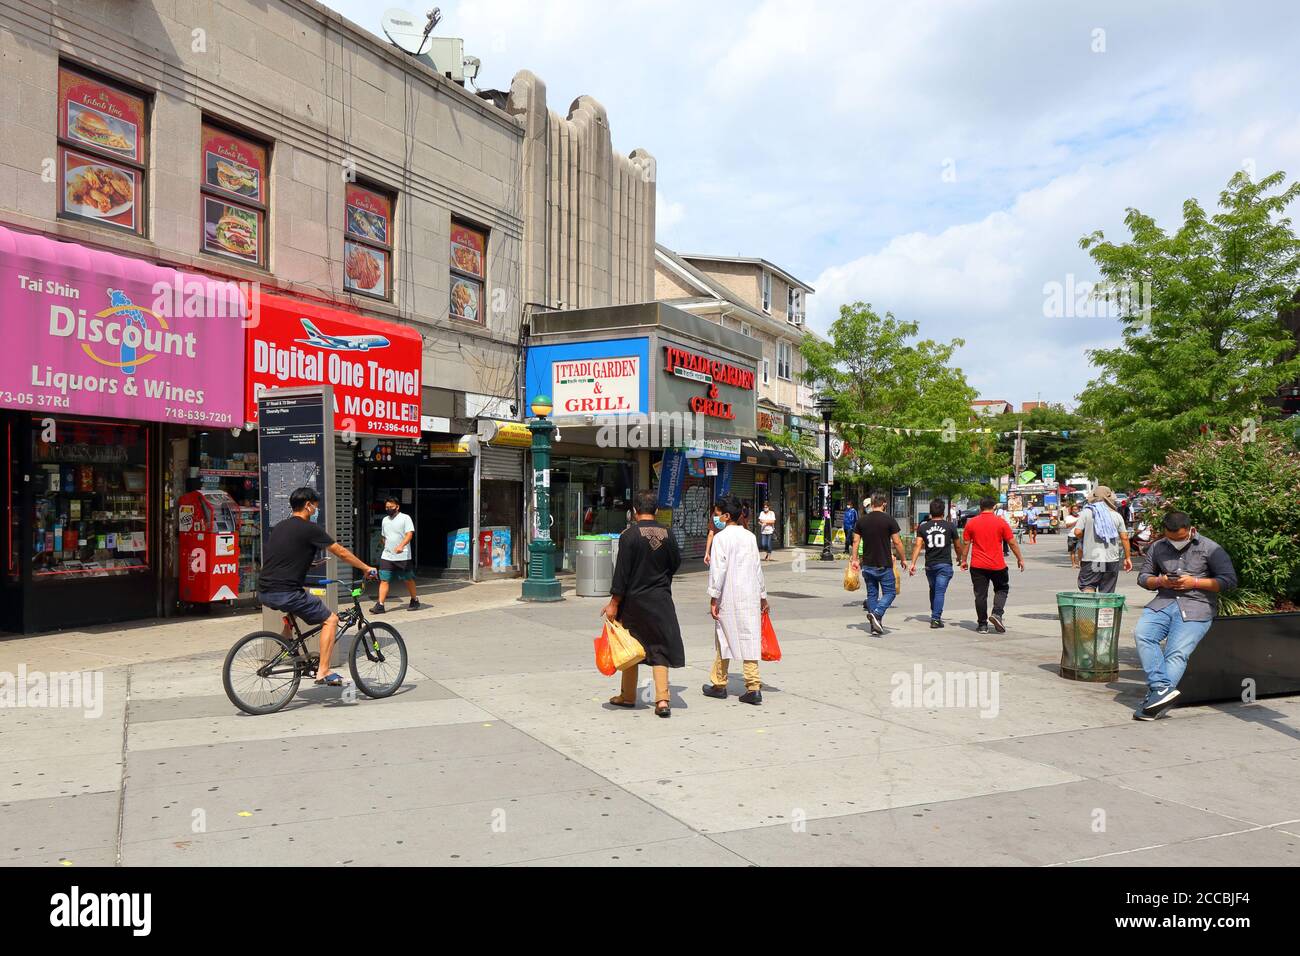 People, shoppers at Diversity Plaza, a pedestrian plaza located at 37th Rd between 73rd and 74th Sts, Jackson Heights, Queens, New York, July 31, 2020 Stock Photo